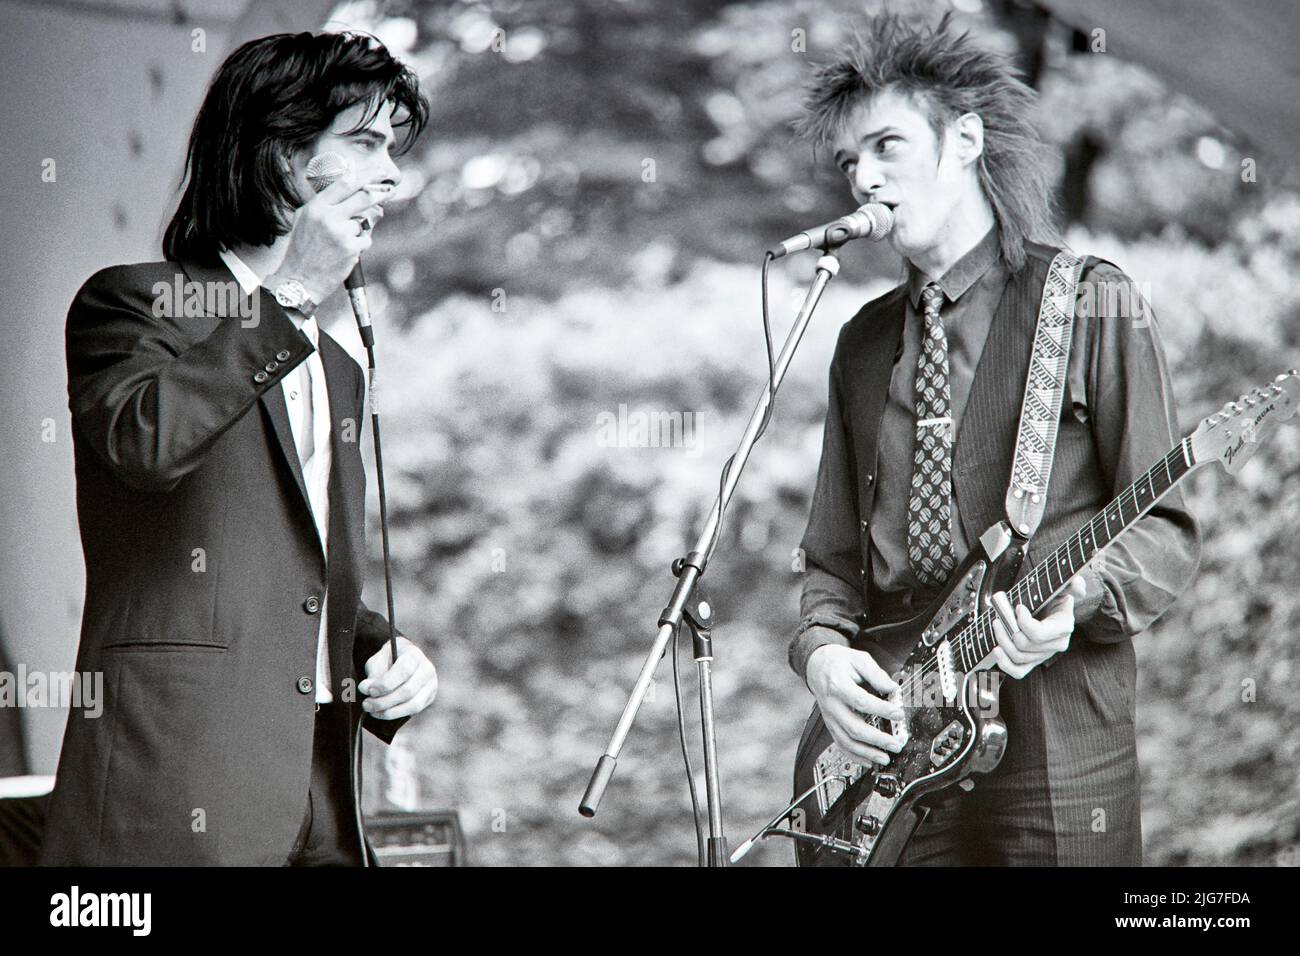 Singer Nick Cave together with guitarist Blixa Bargeld at the concert of the Australian group 'Nick Cave And The Bad Seeds' in Hamburg's Stadtpark. Stock Photo